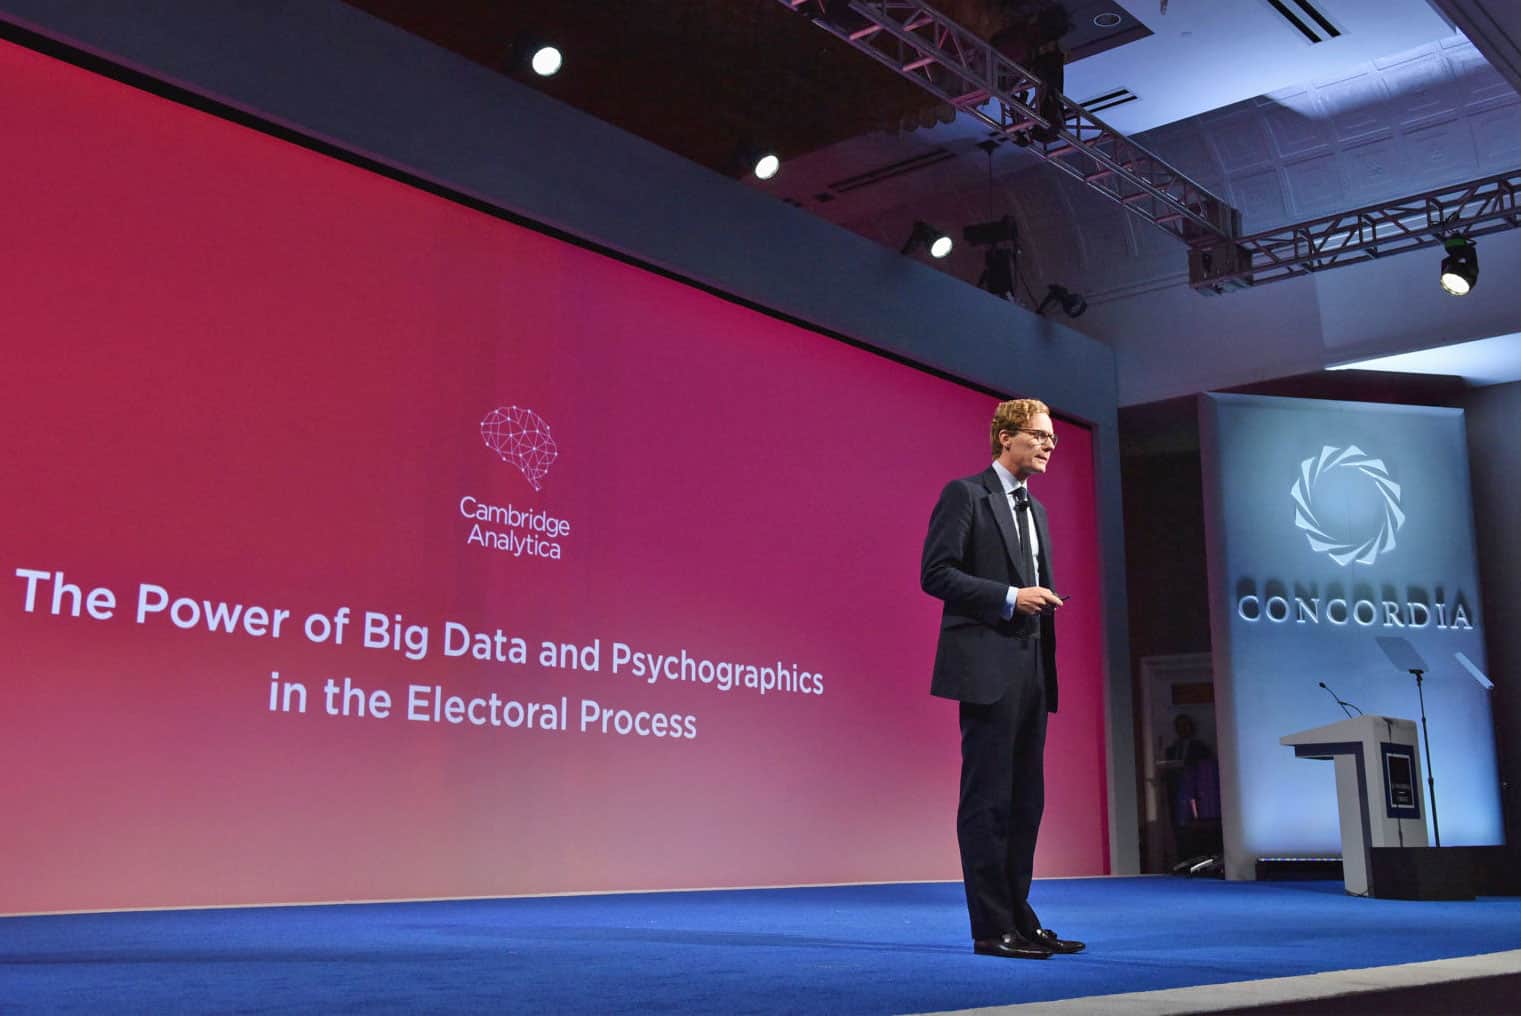 Cambridge Analytica's data was accessed in Russia